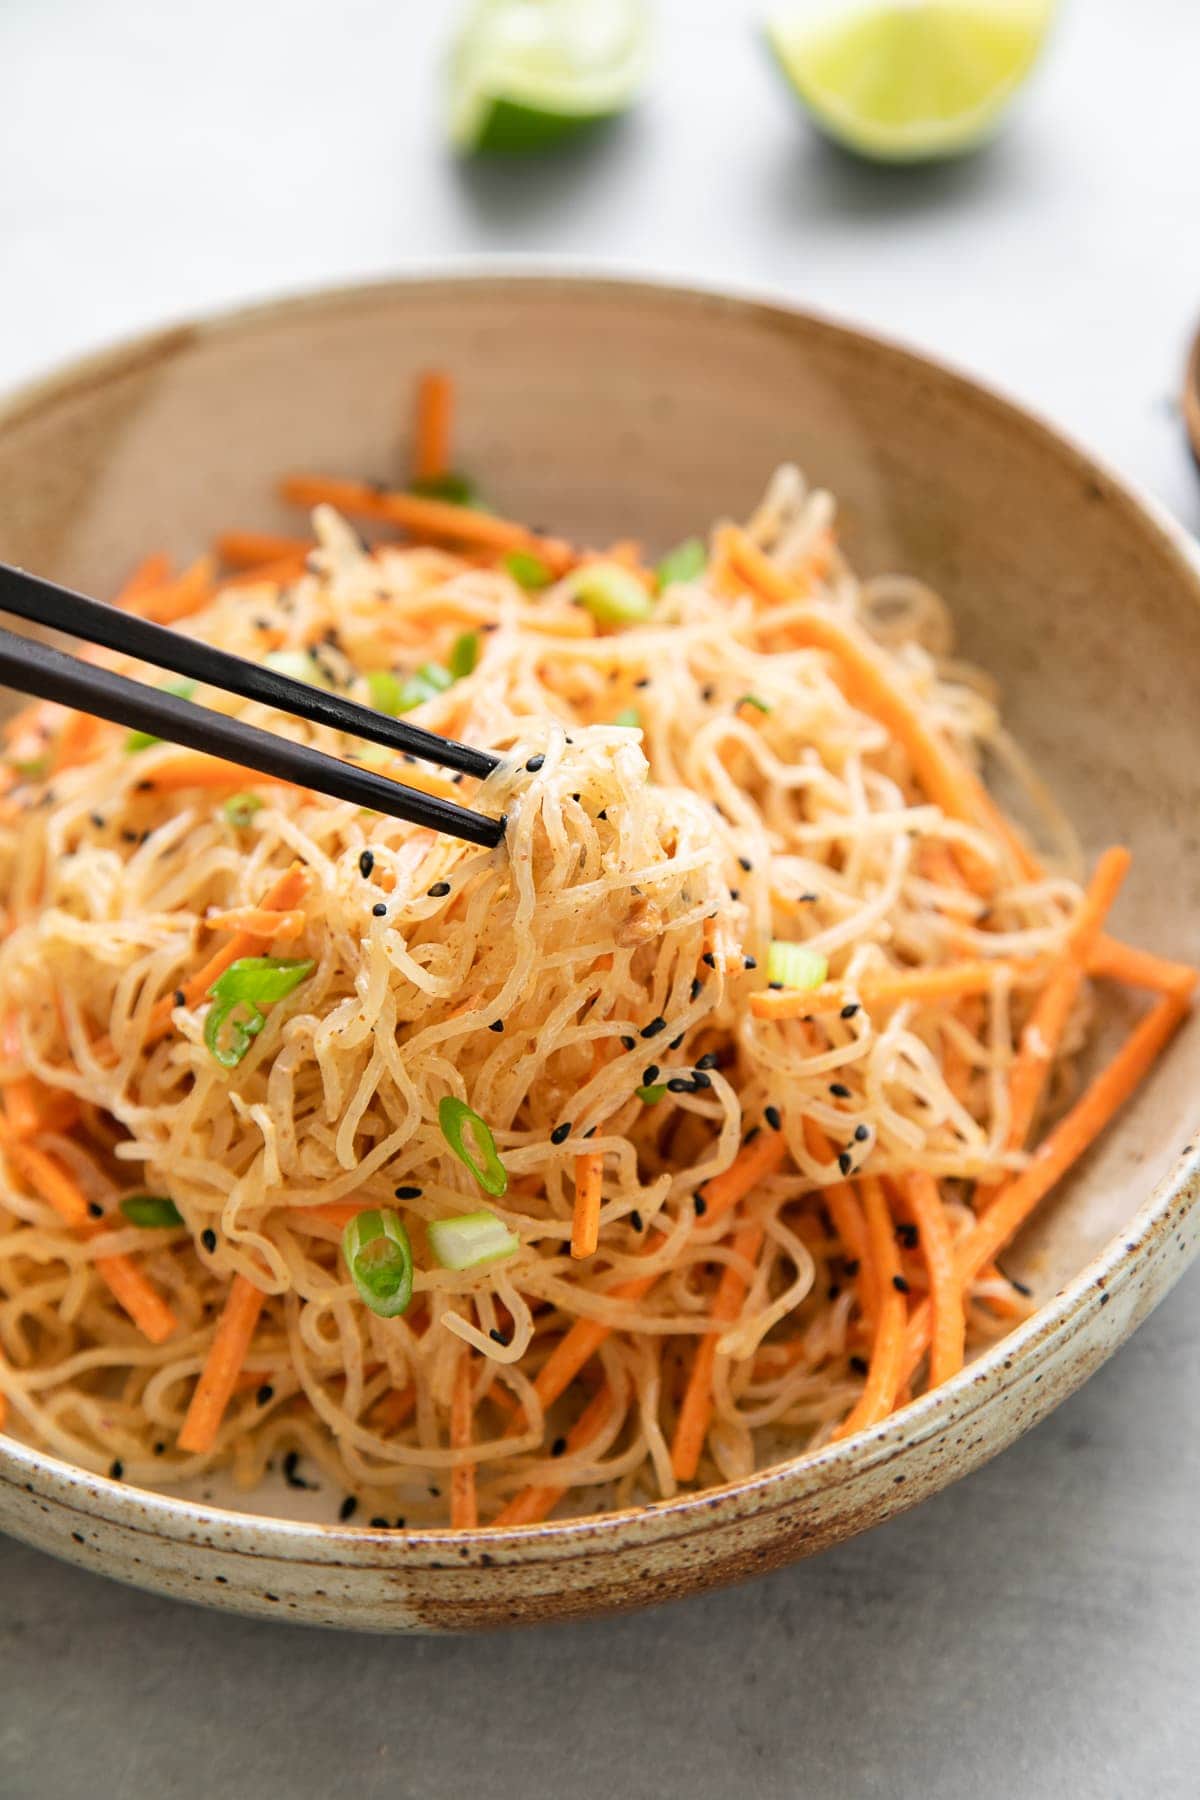 side angle view of serving of kelp noodle salad in bowl with chopsticks holding noodles.